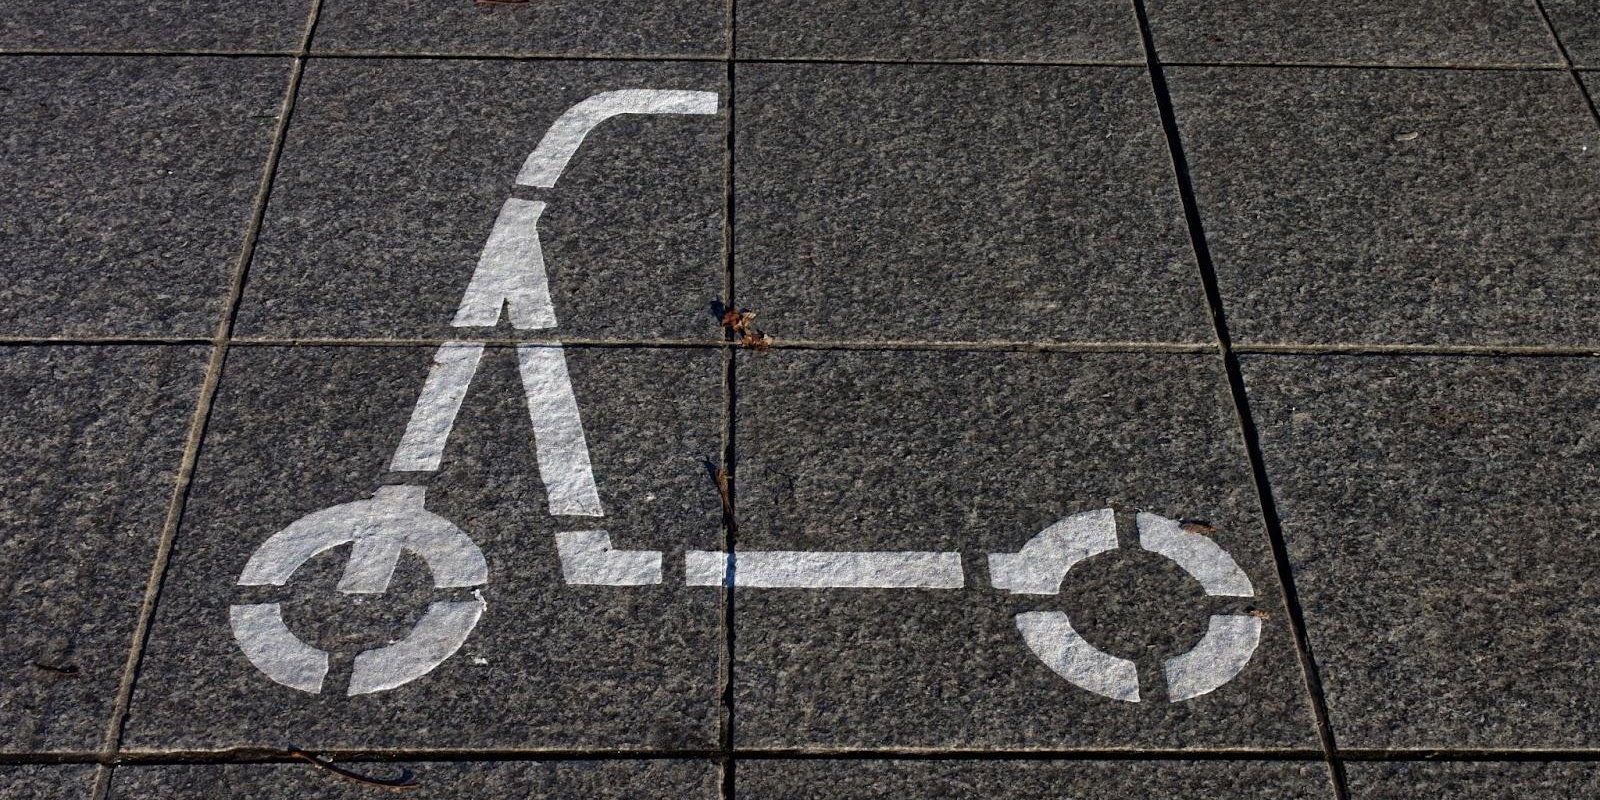 Micromobility for Europe advocates for smarter parking solutions for e-scooters and e-bikes